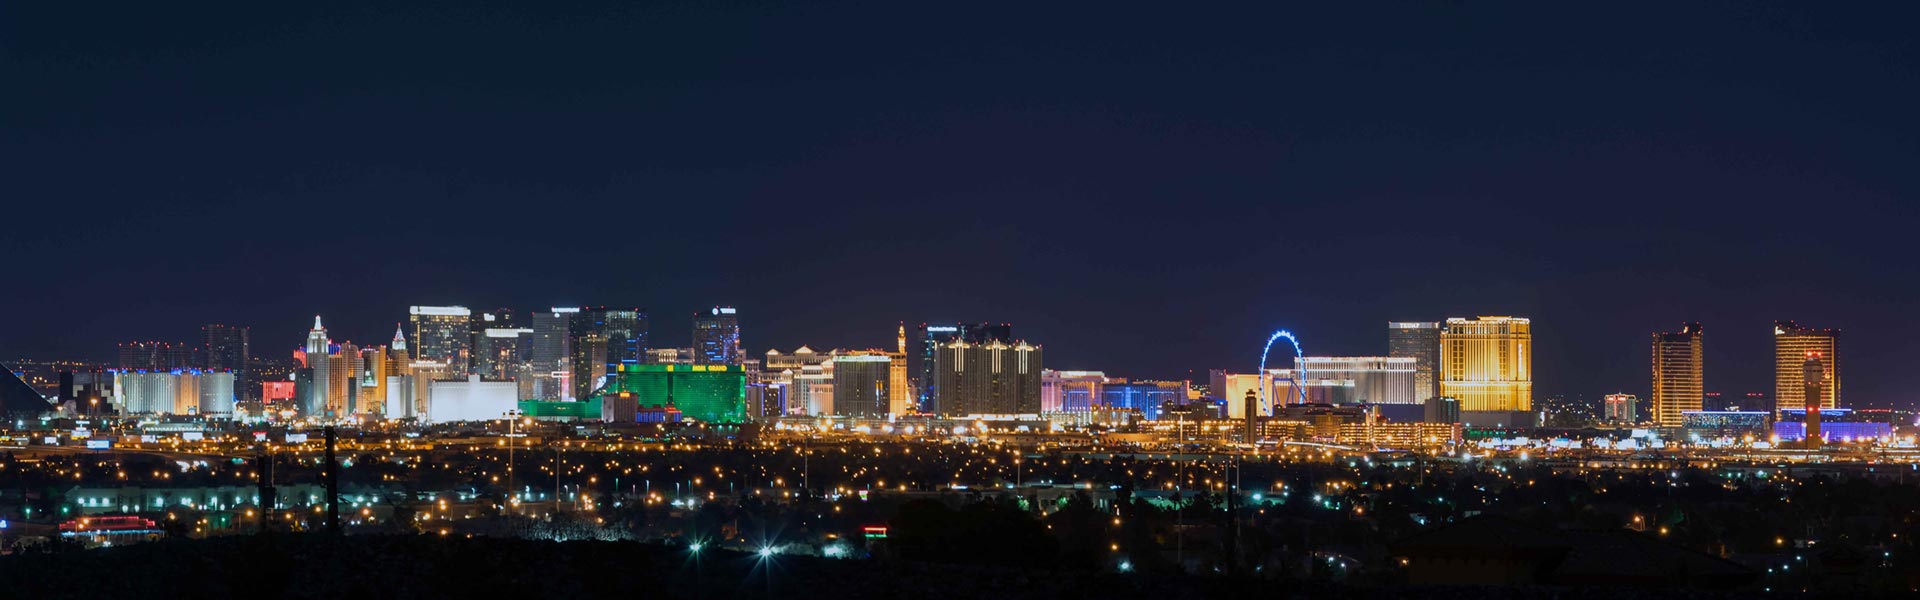 SAP Unveils “Must See” Keynote Schedule for SuccessConnect in Las Vegas: Robert Enslin, Greg Tomb, Jennifer Morgan and More